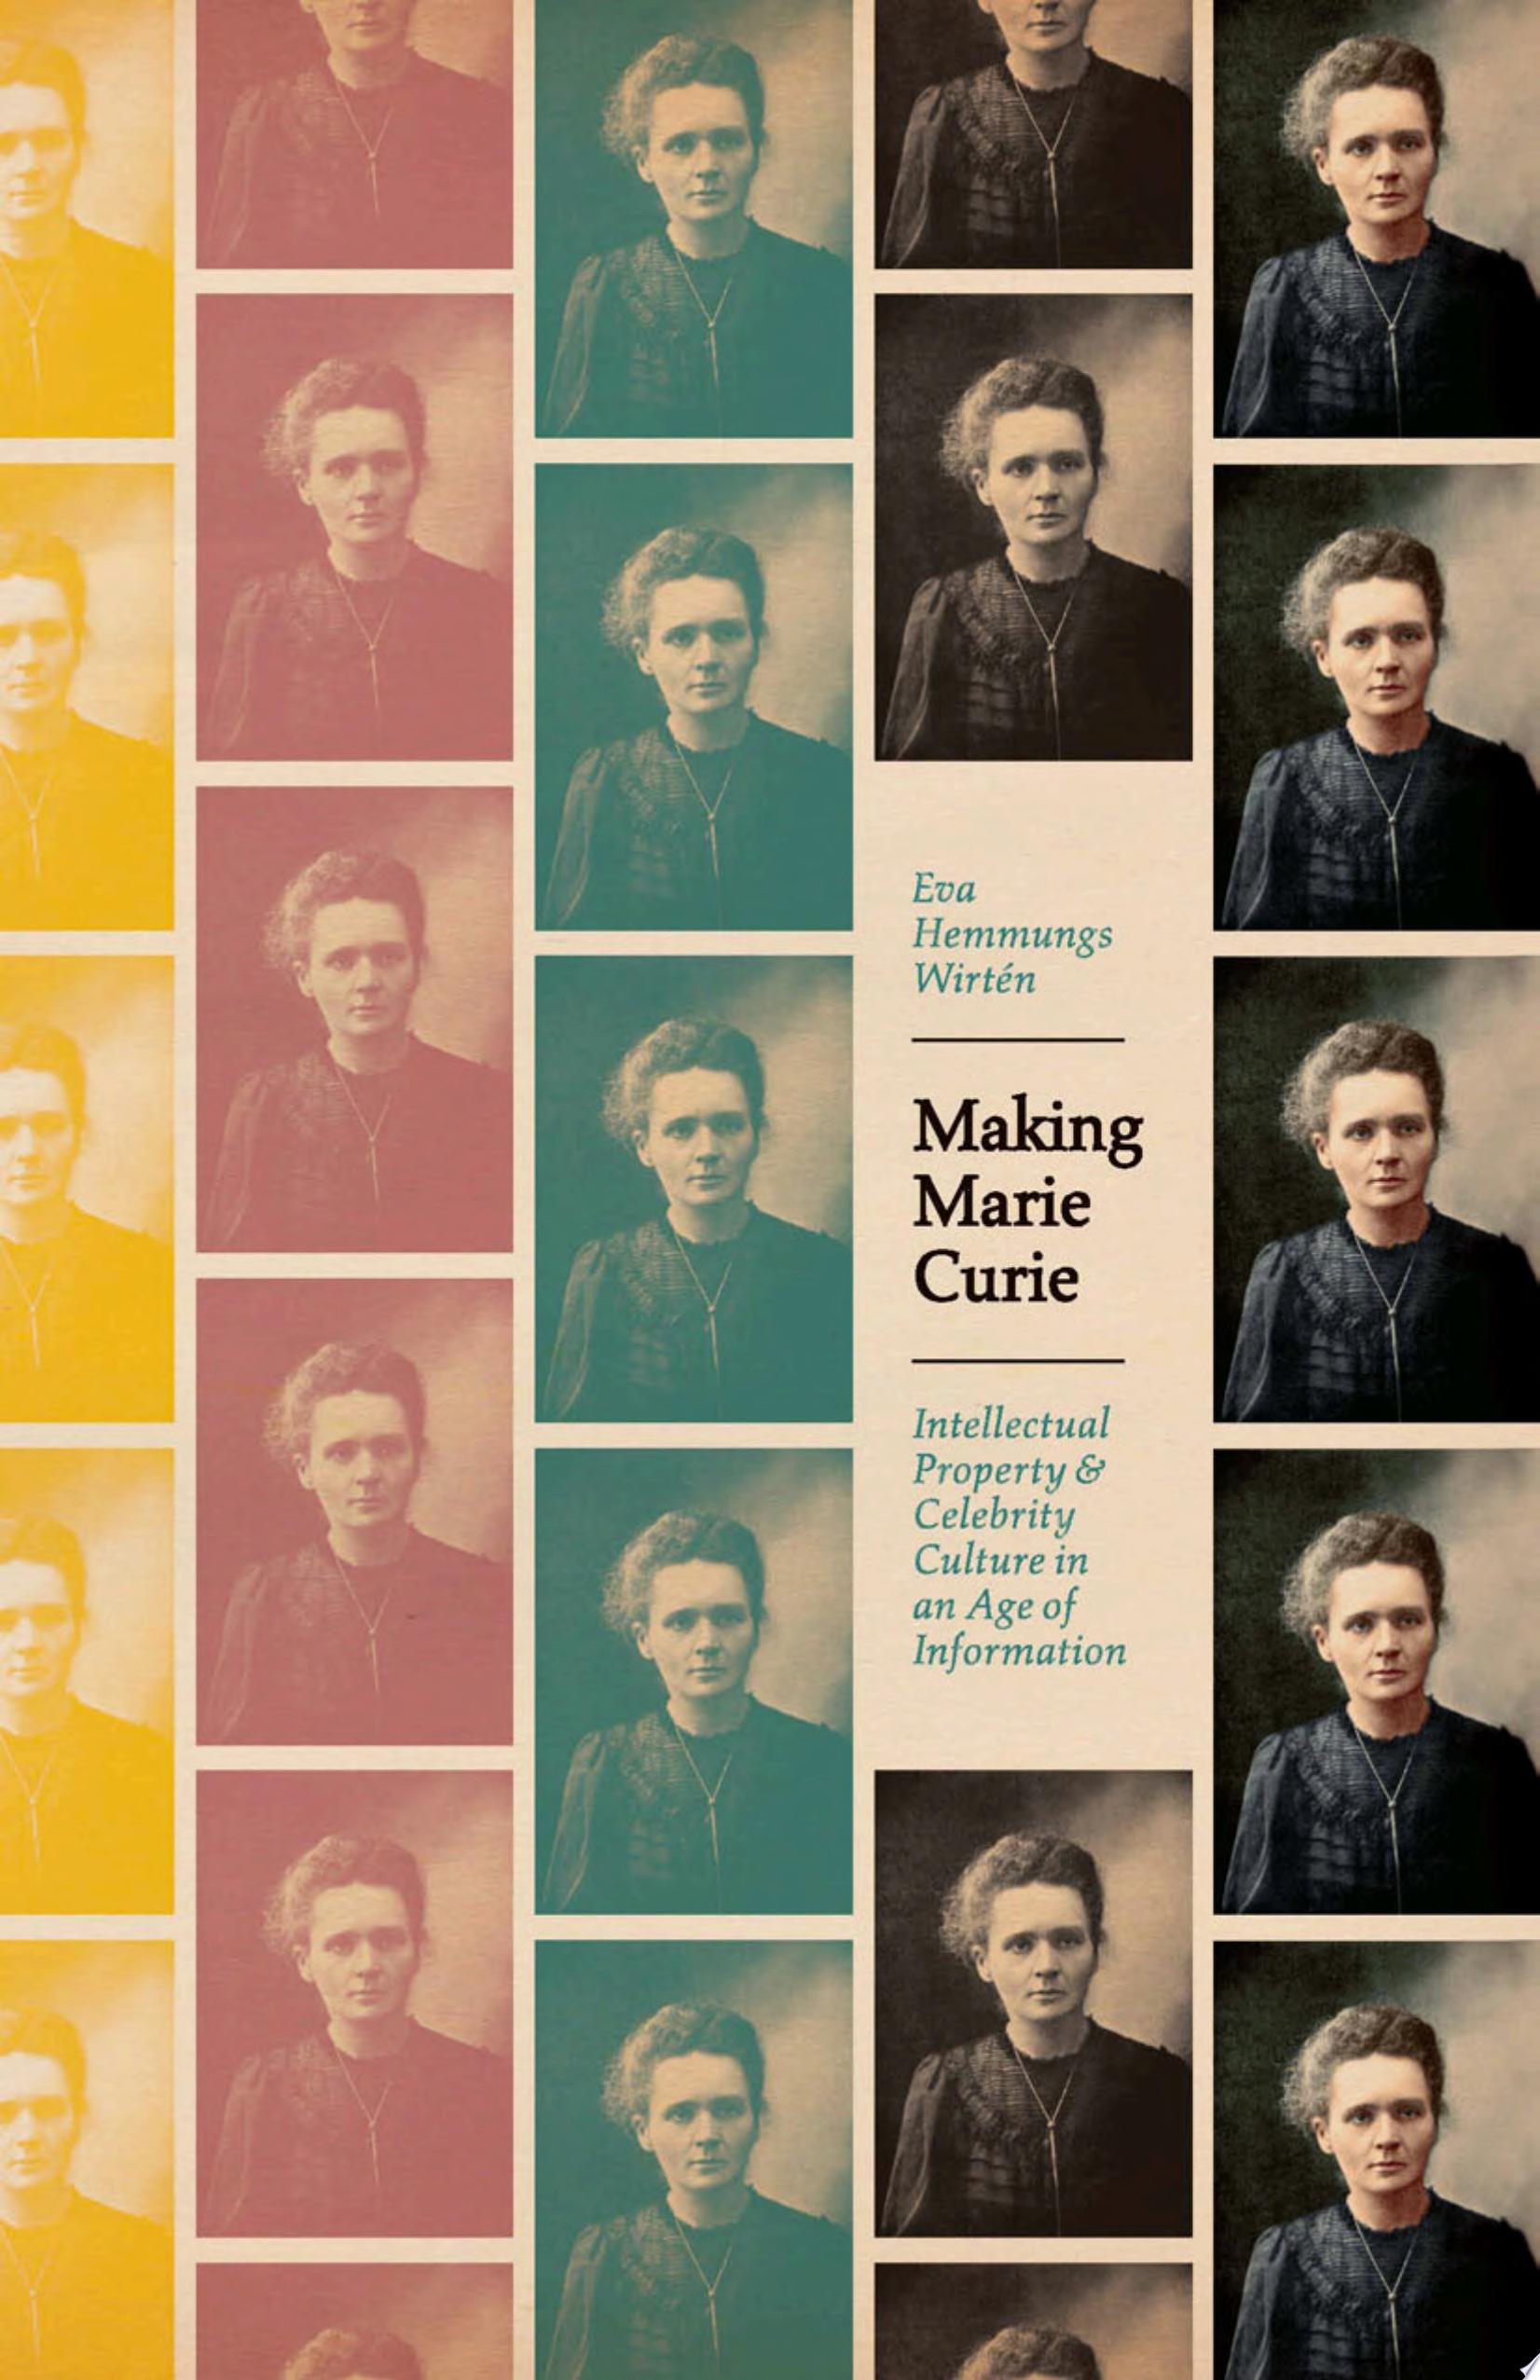 Image for "Making Marie Curie"